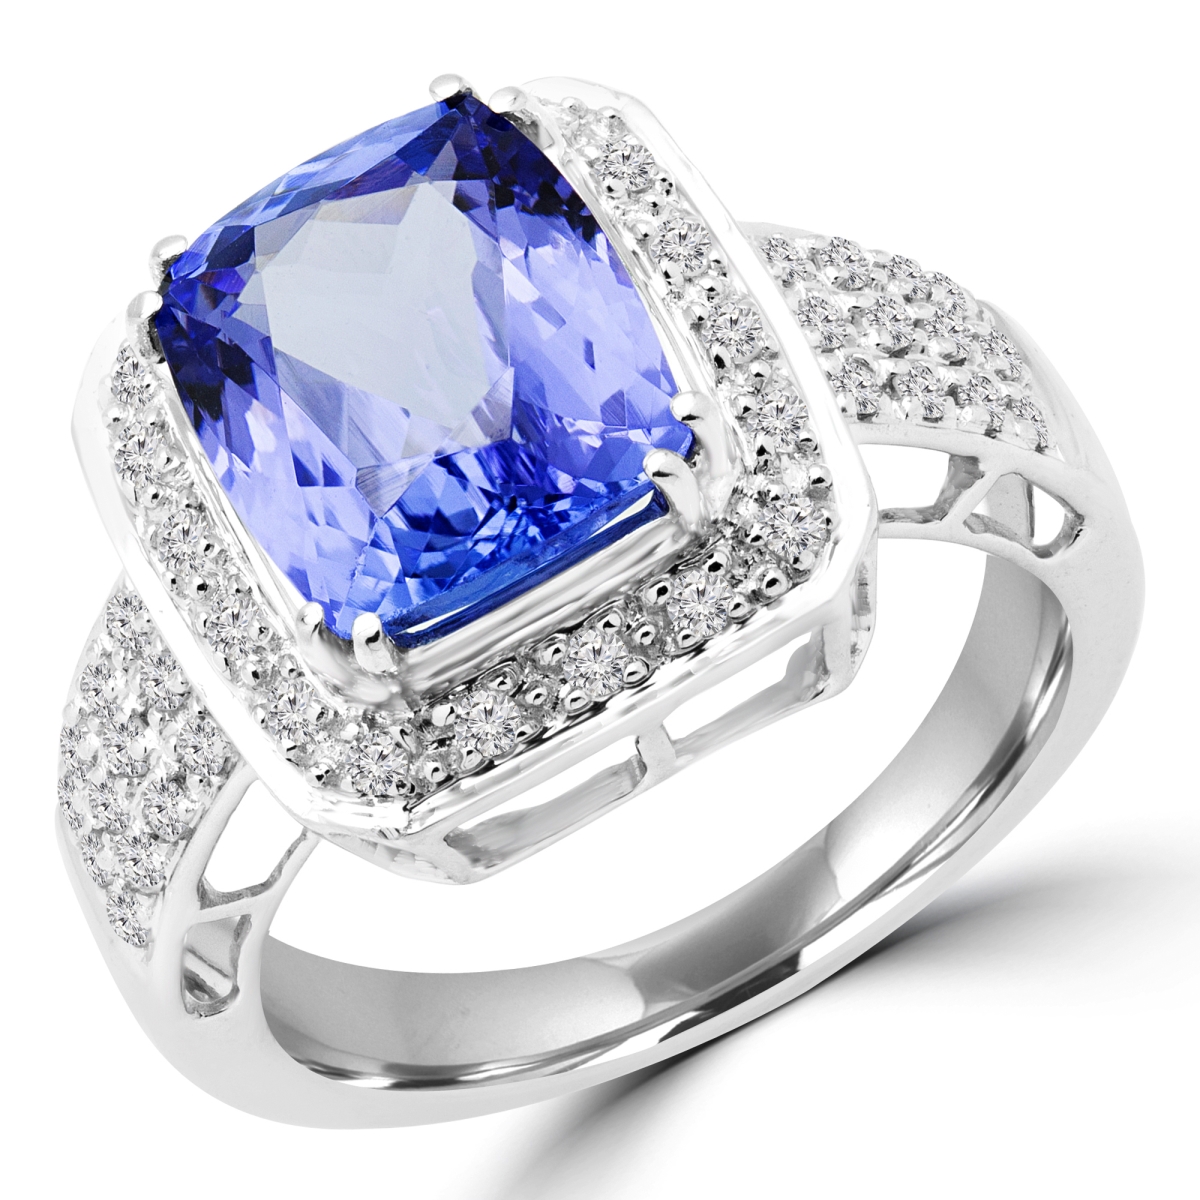 Picture of Majesty Diamonds MD180161-3 3.5 CTW Cushion Purple Tanzanite Halo Cocktail Ring in 14K White Gold - Size 3